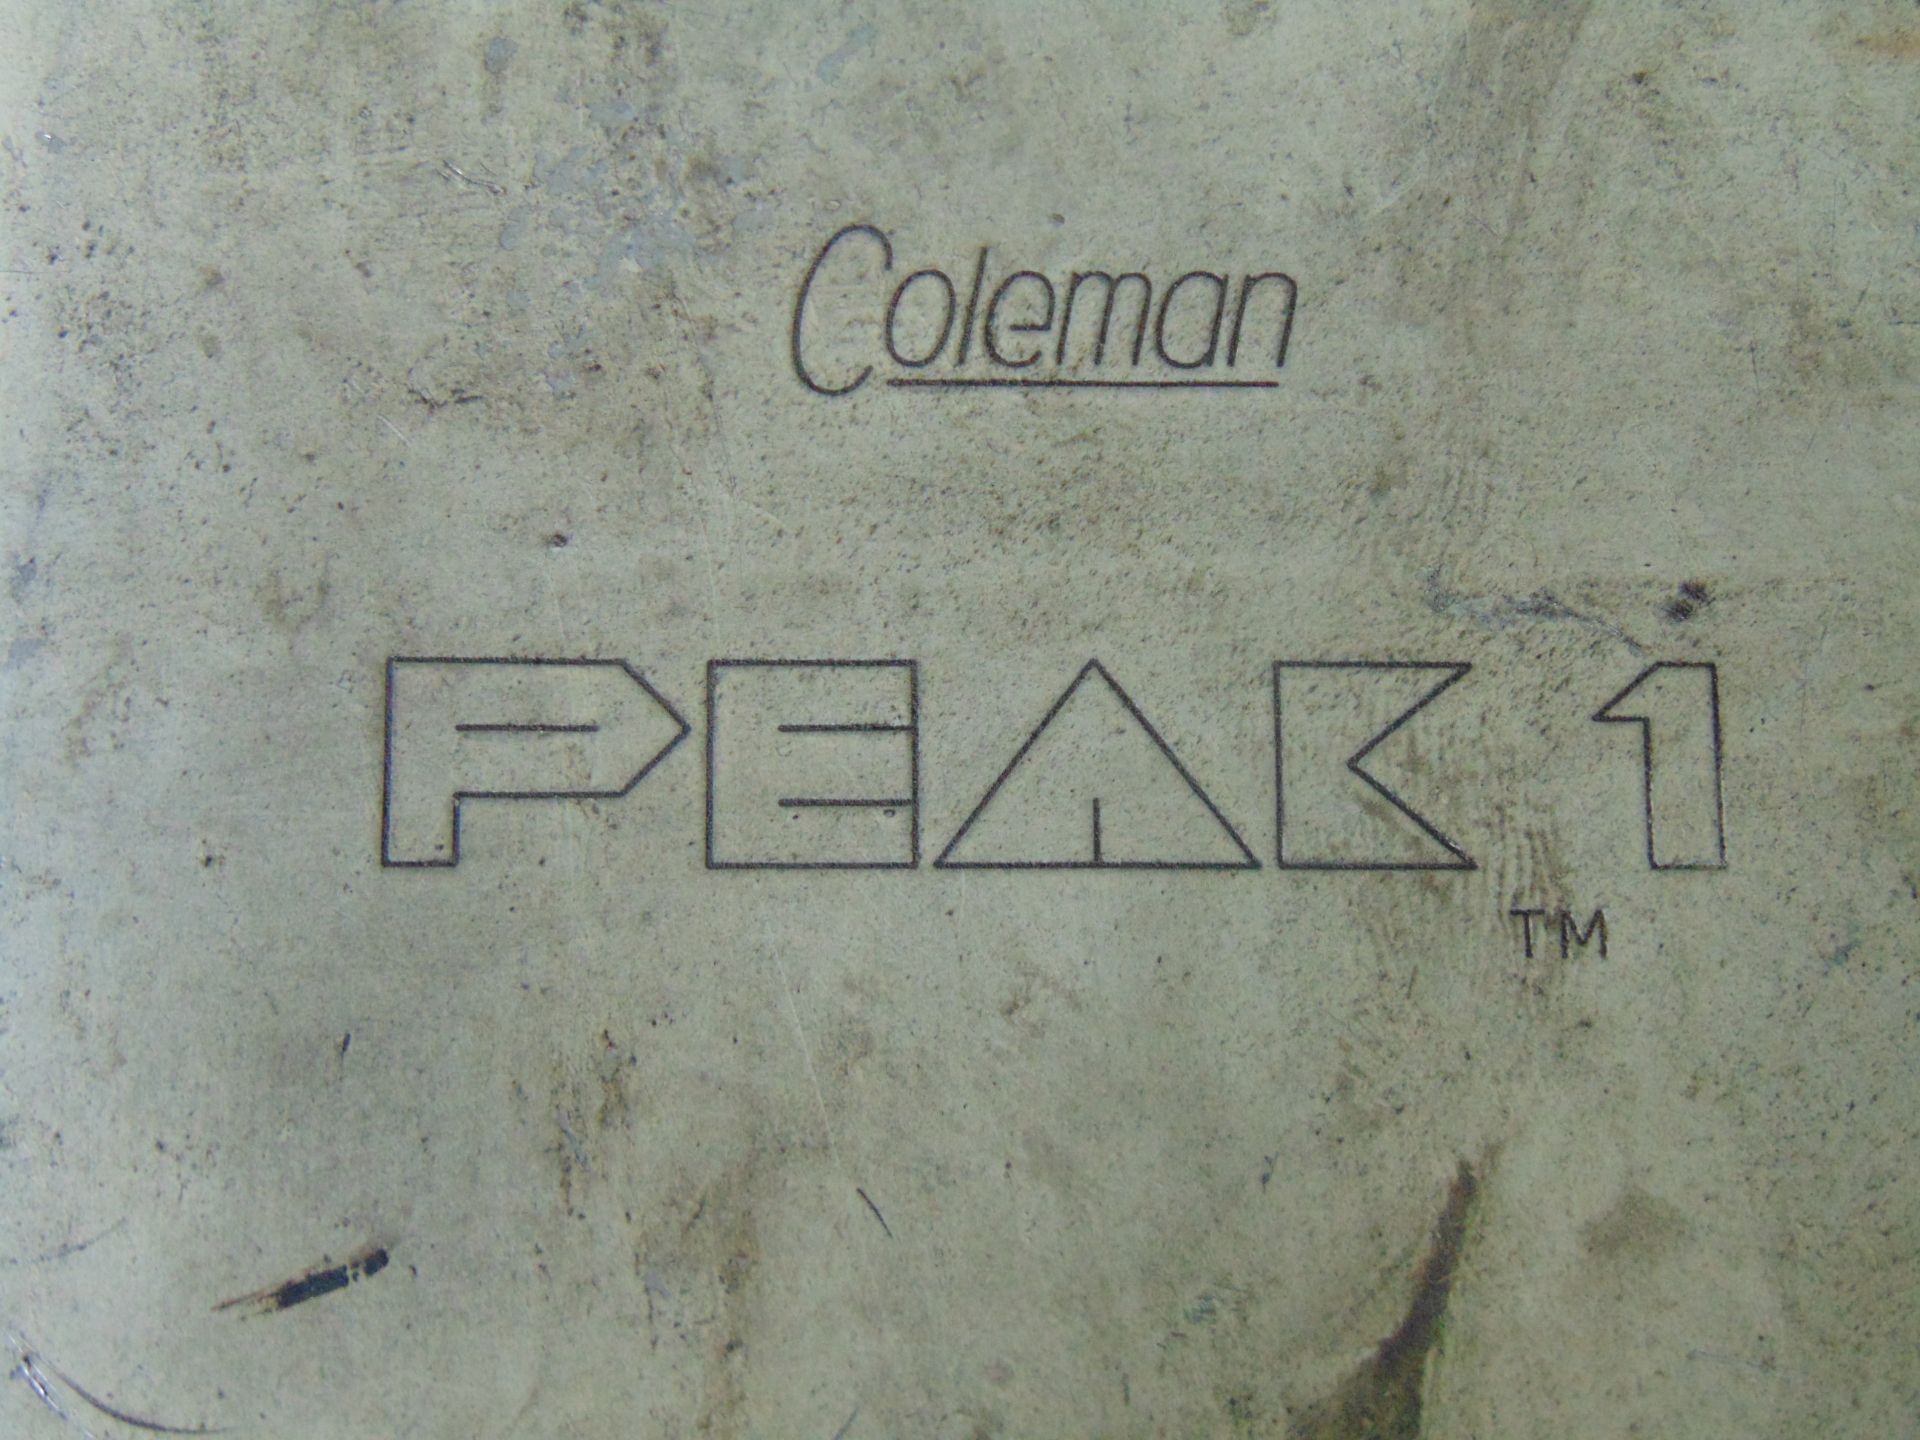 VERY NICE COLEMAN PEAK I CAMPING COOKER WITH ACCESSORIES - Image 8 of 8